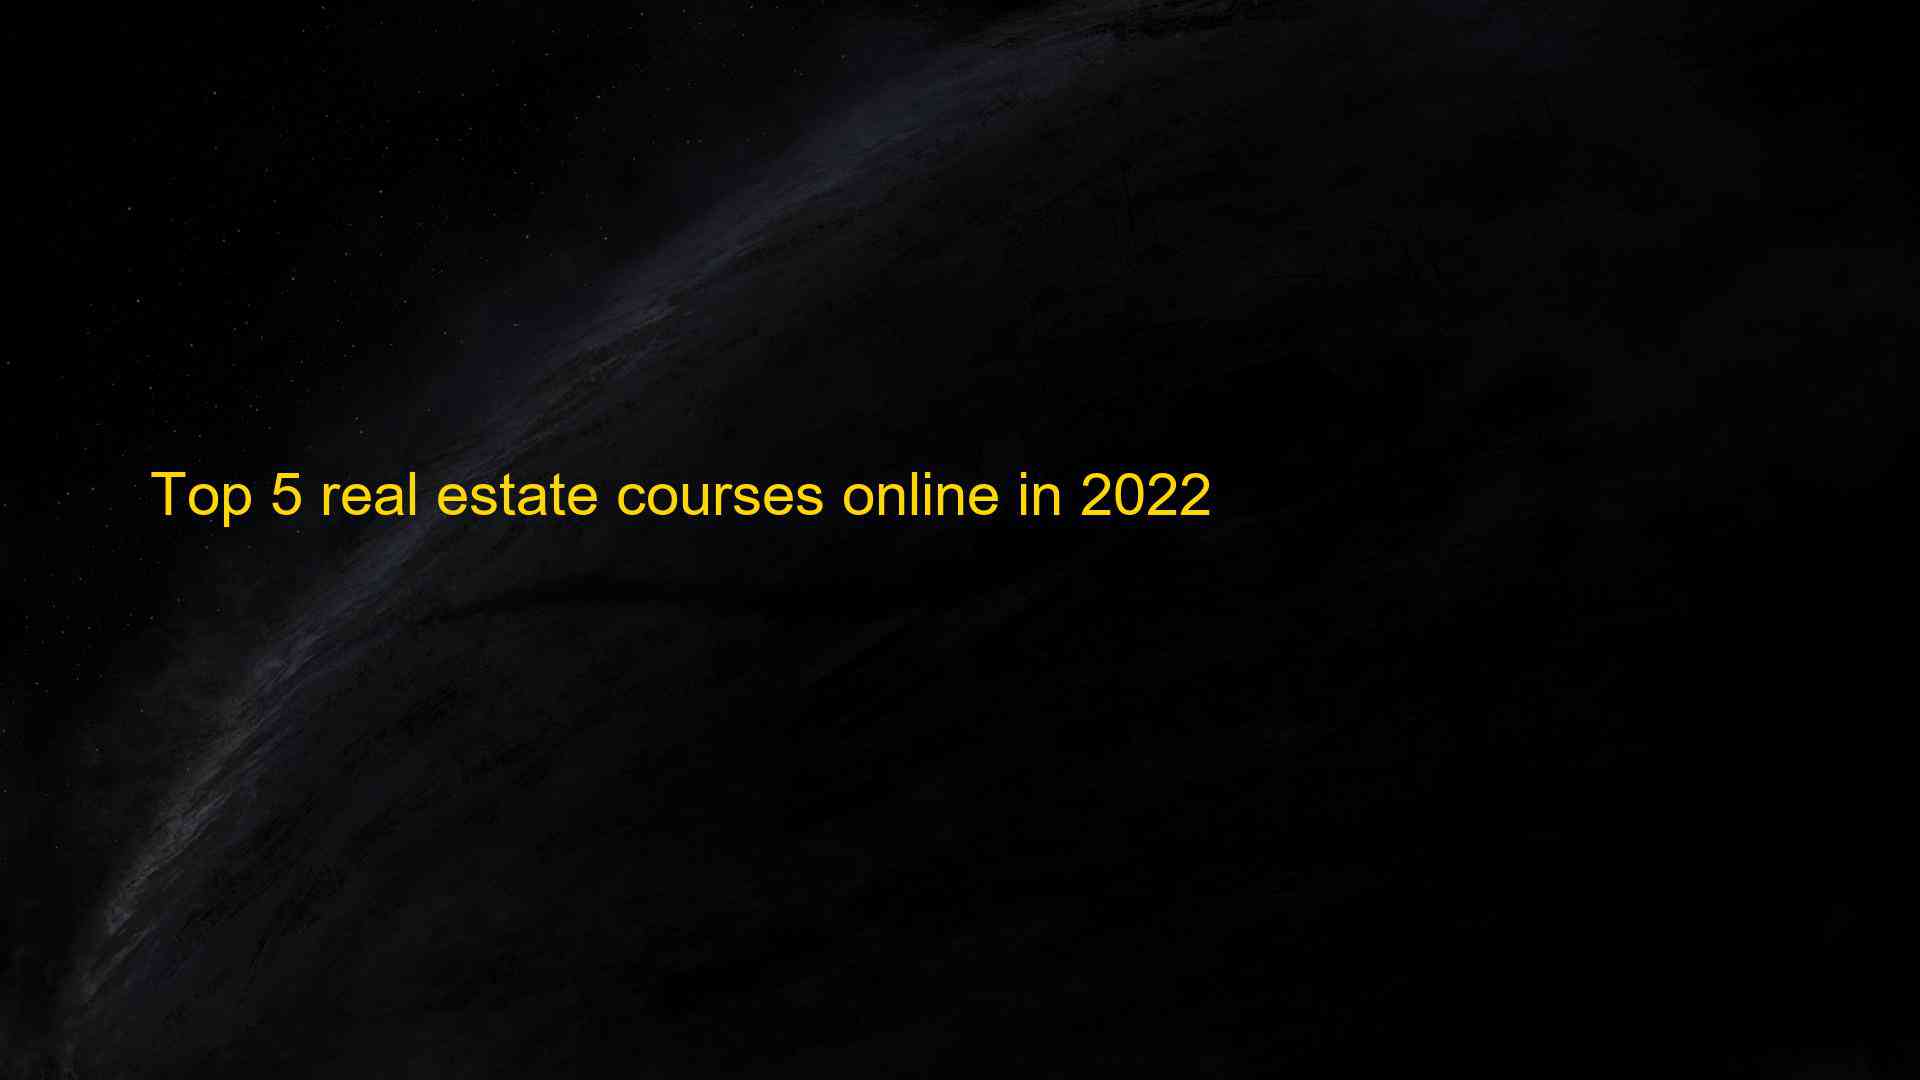 Top 5 real estate courses online in 2022 1660818514